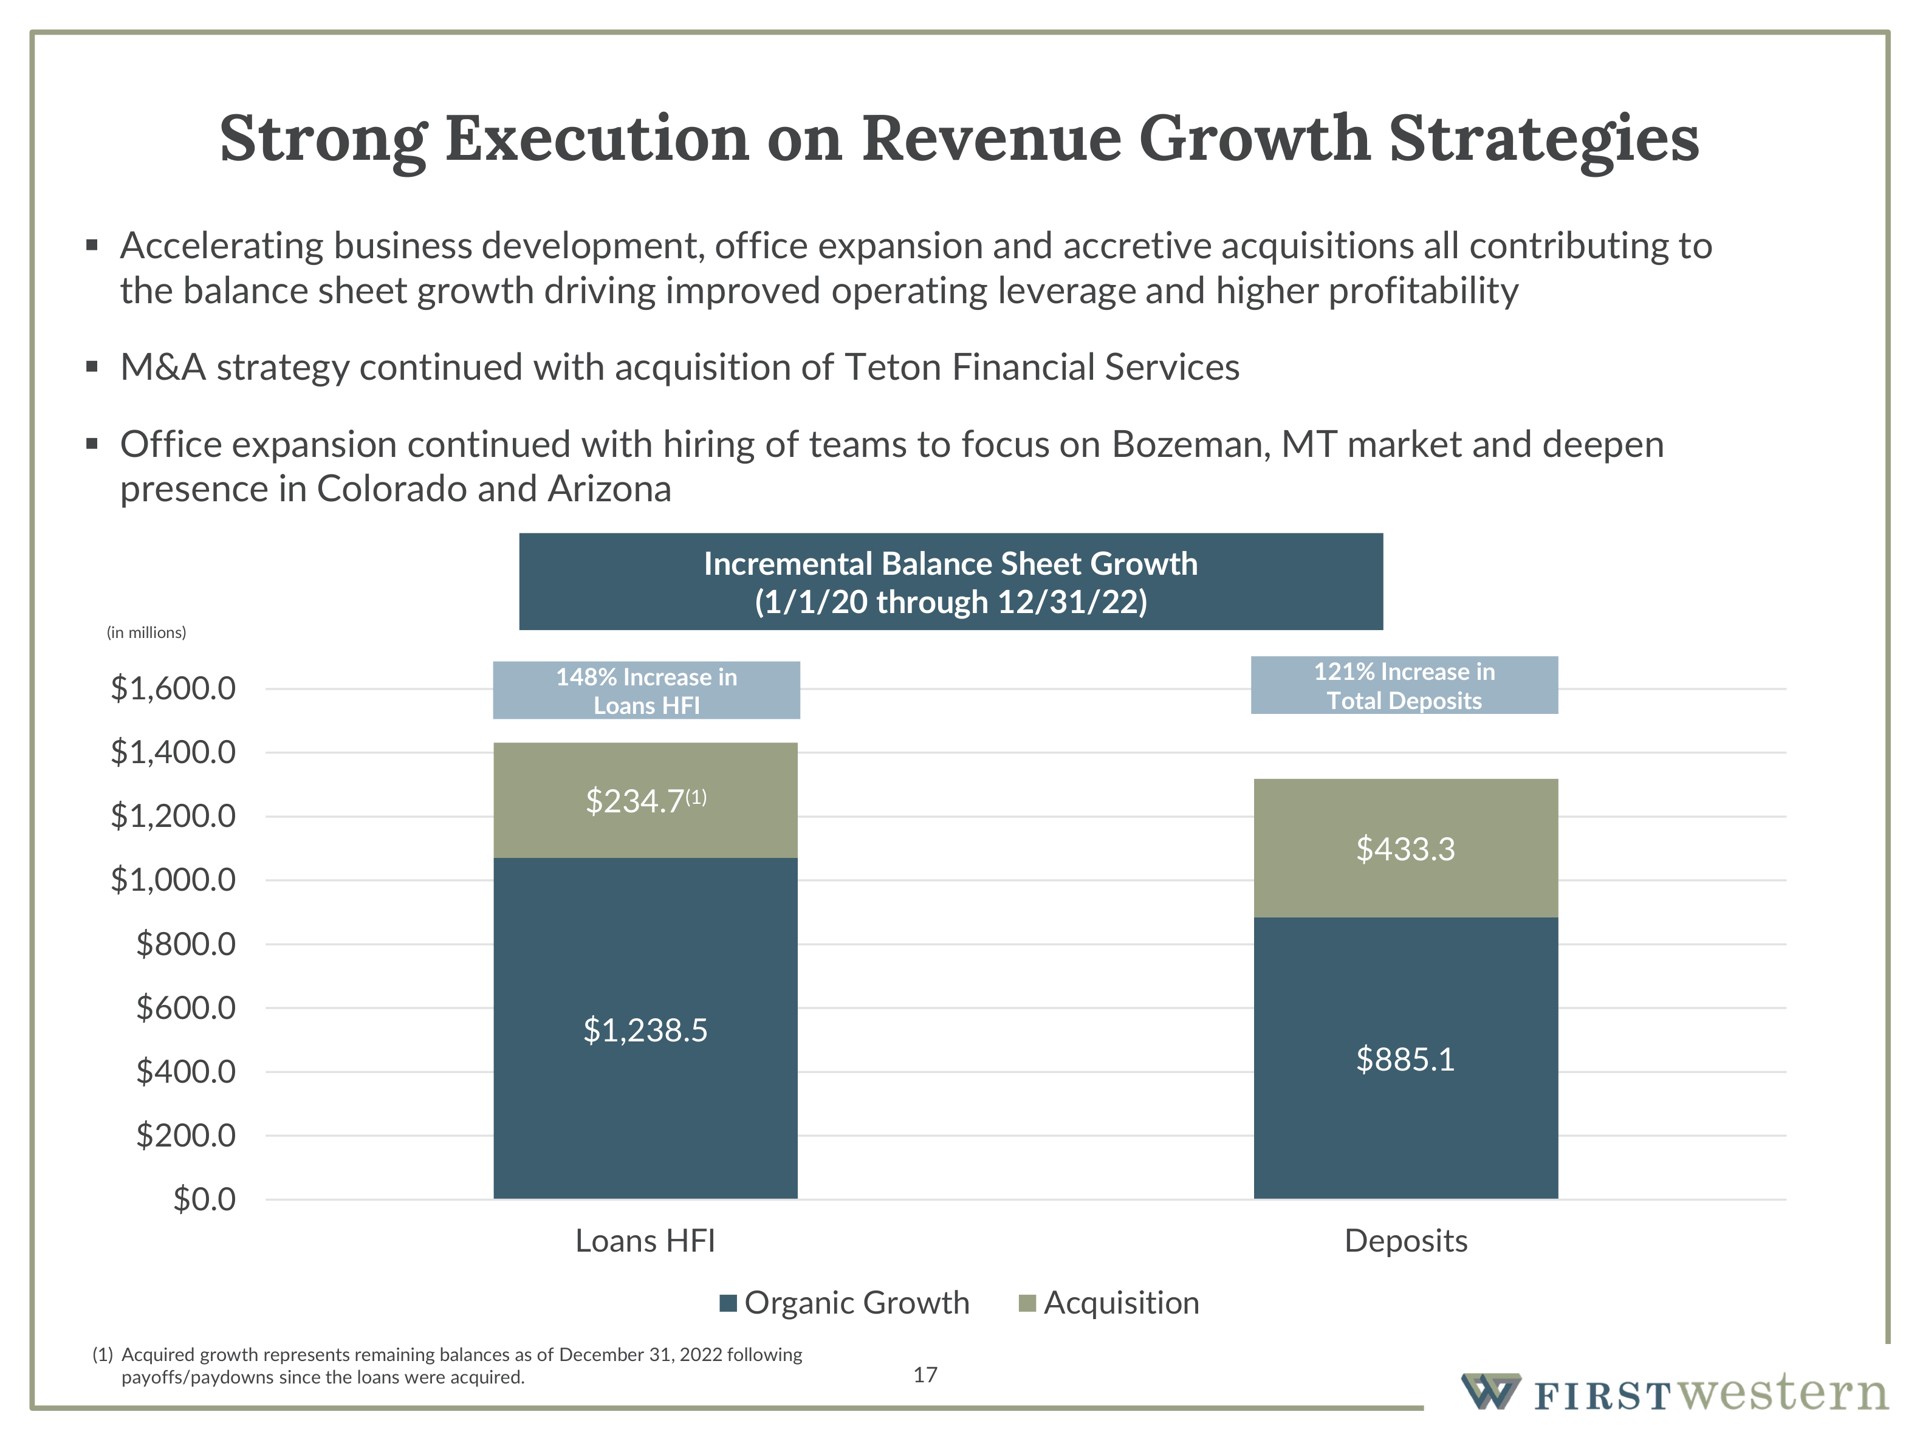 strong execution on revenue growth strategies | First Western Financial